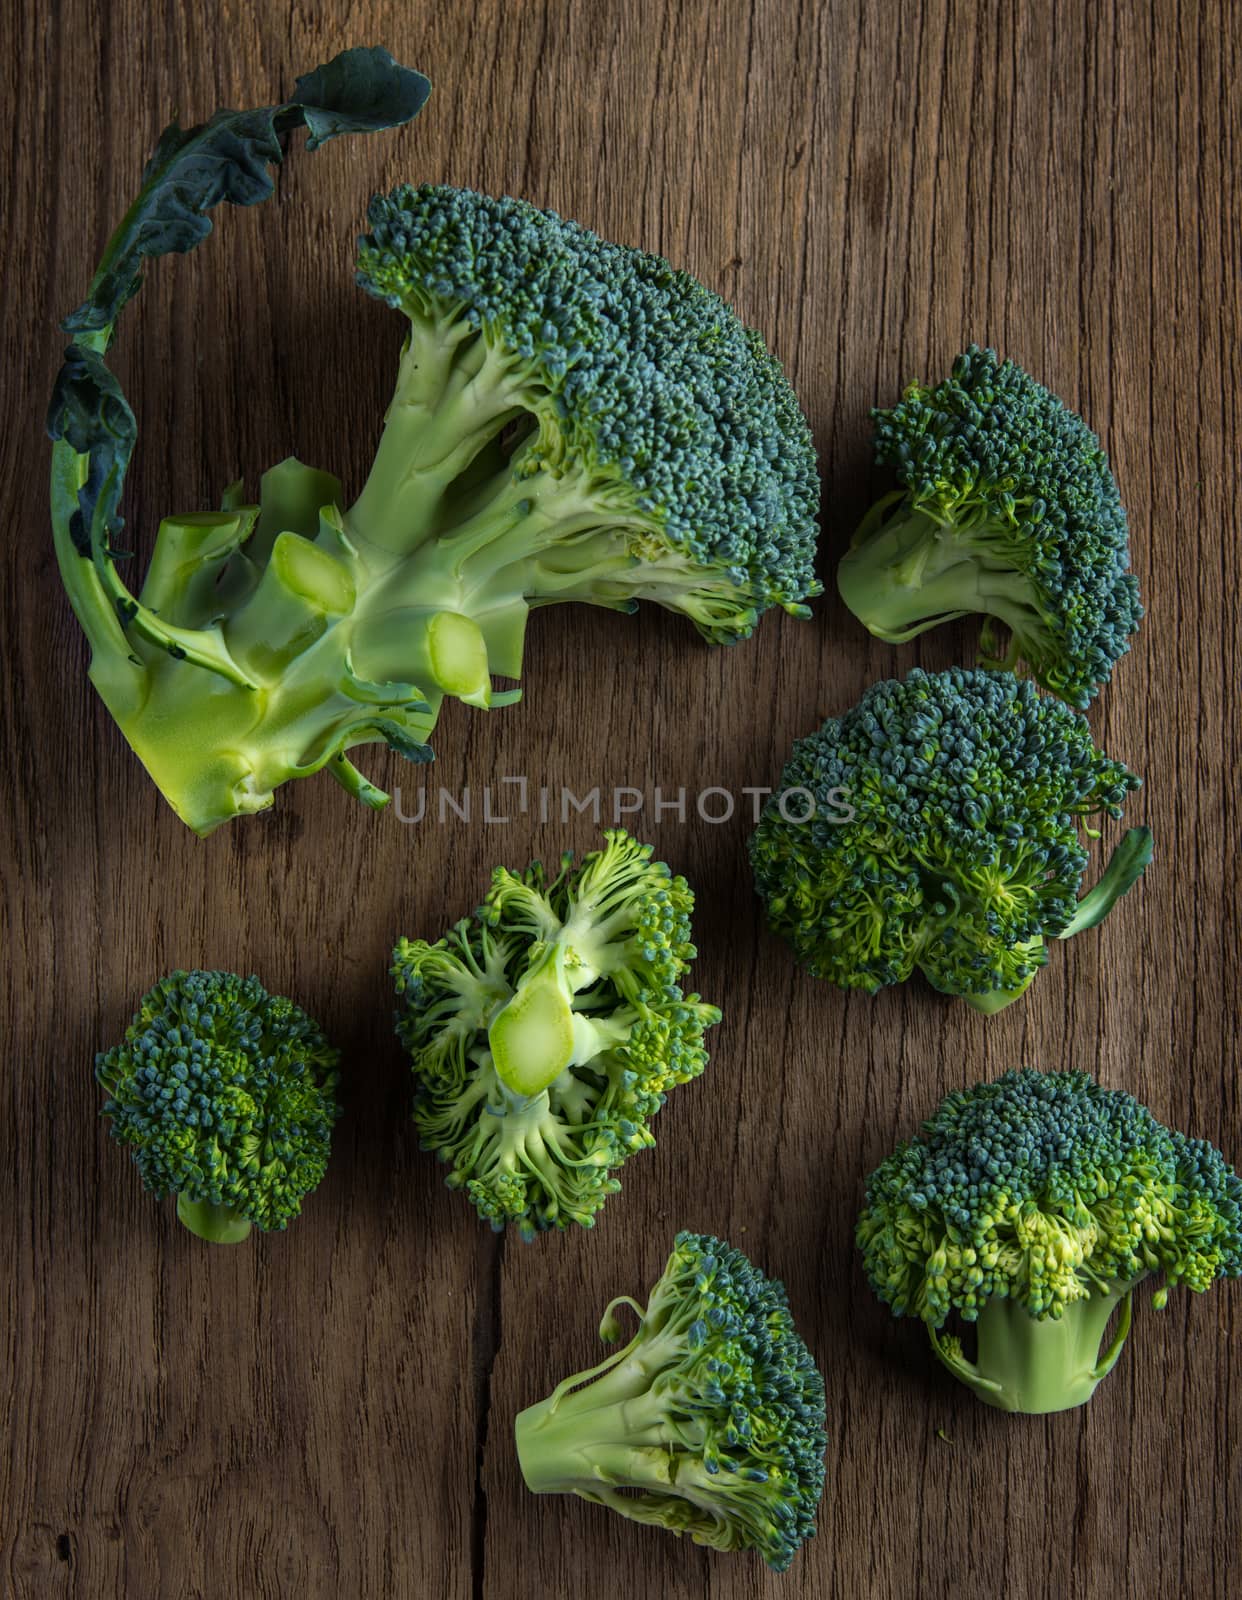 Broccoli on old wooden